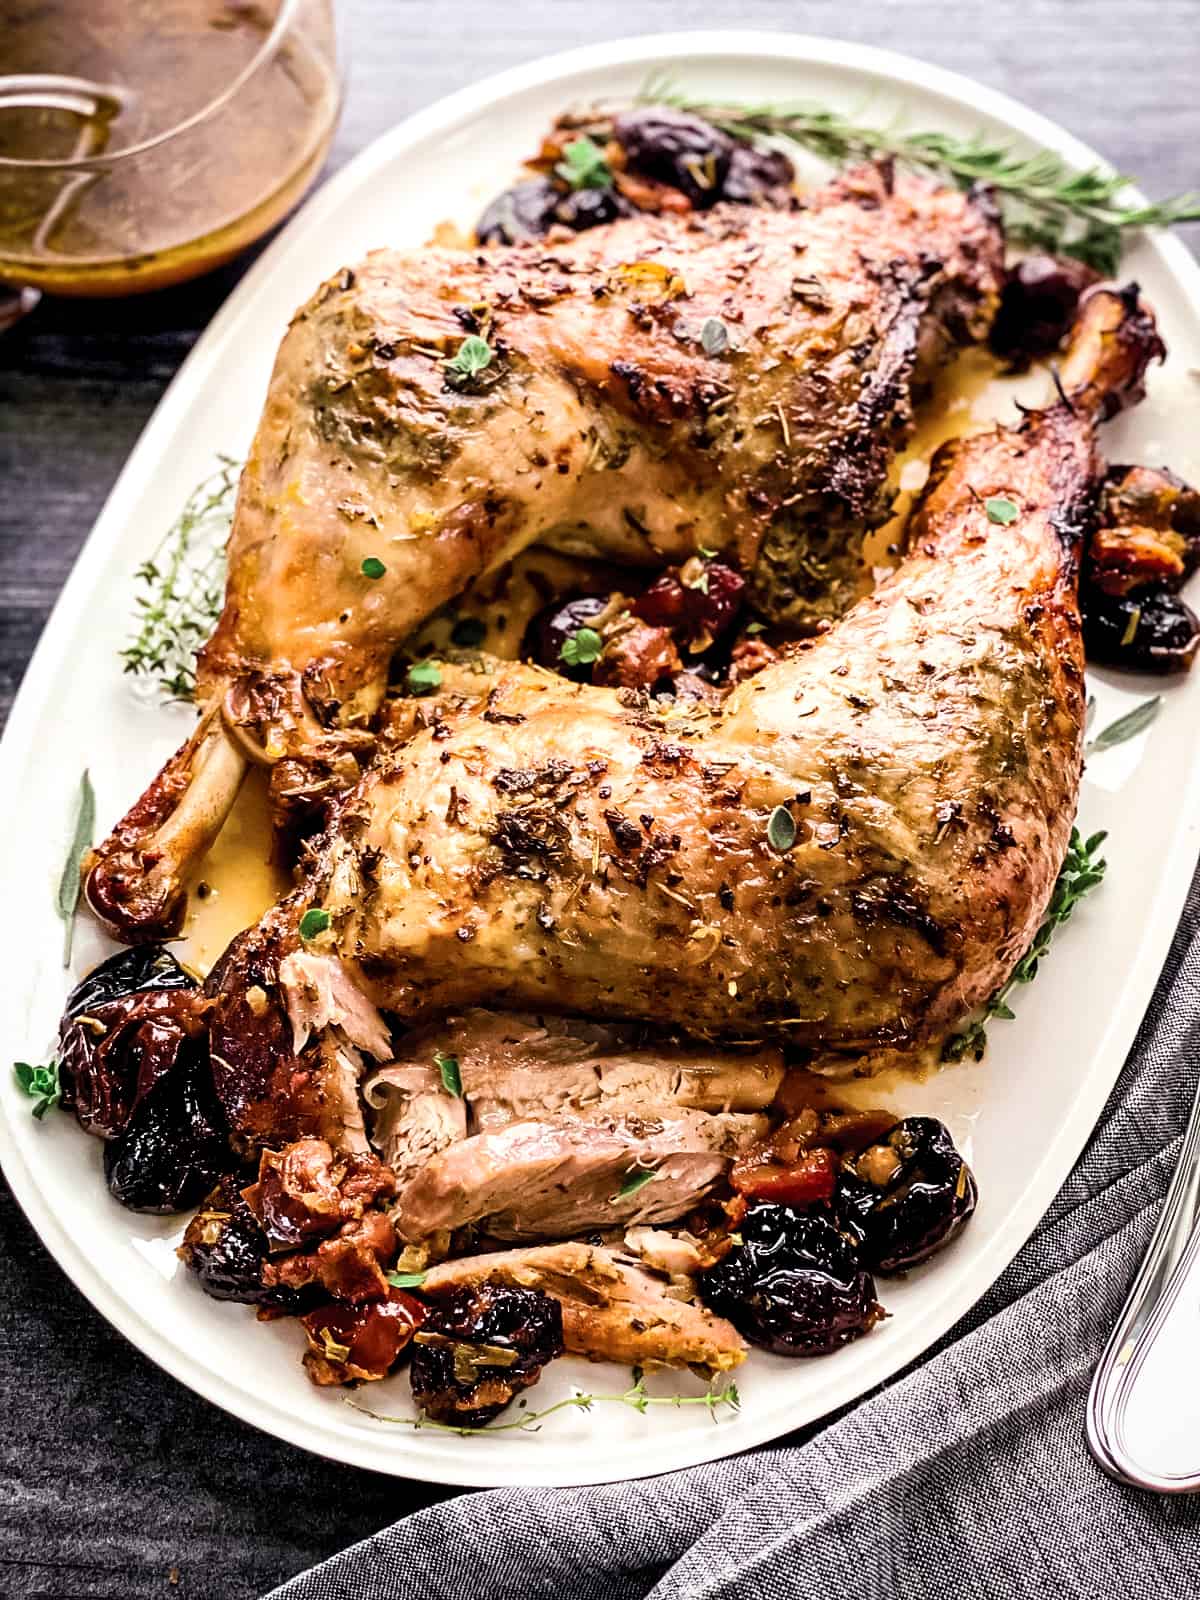 Two roasted turkey thighs with drumsticks on a platter with herbs and dry fruit, and gravy. Serving utensils are on one side and a bowl with gravy on the other.